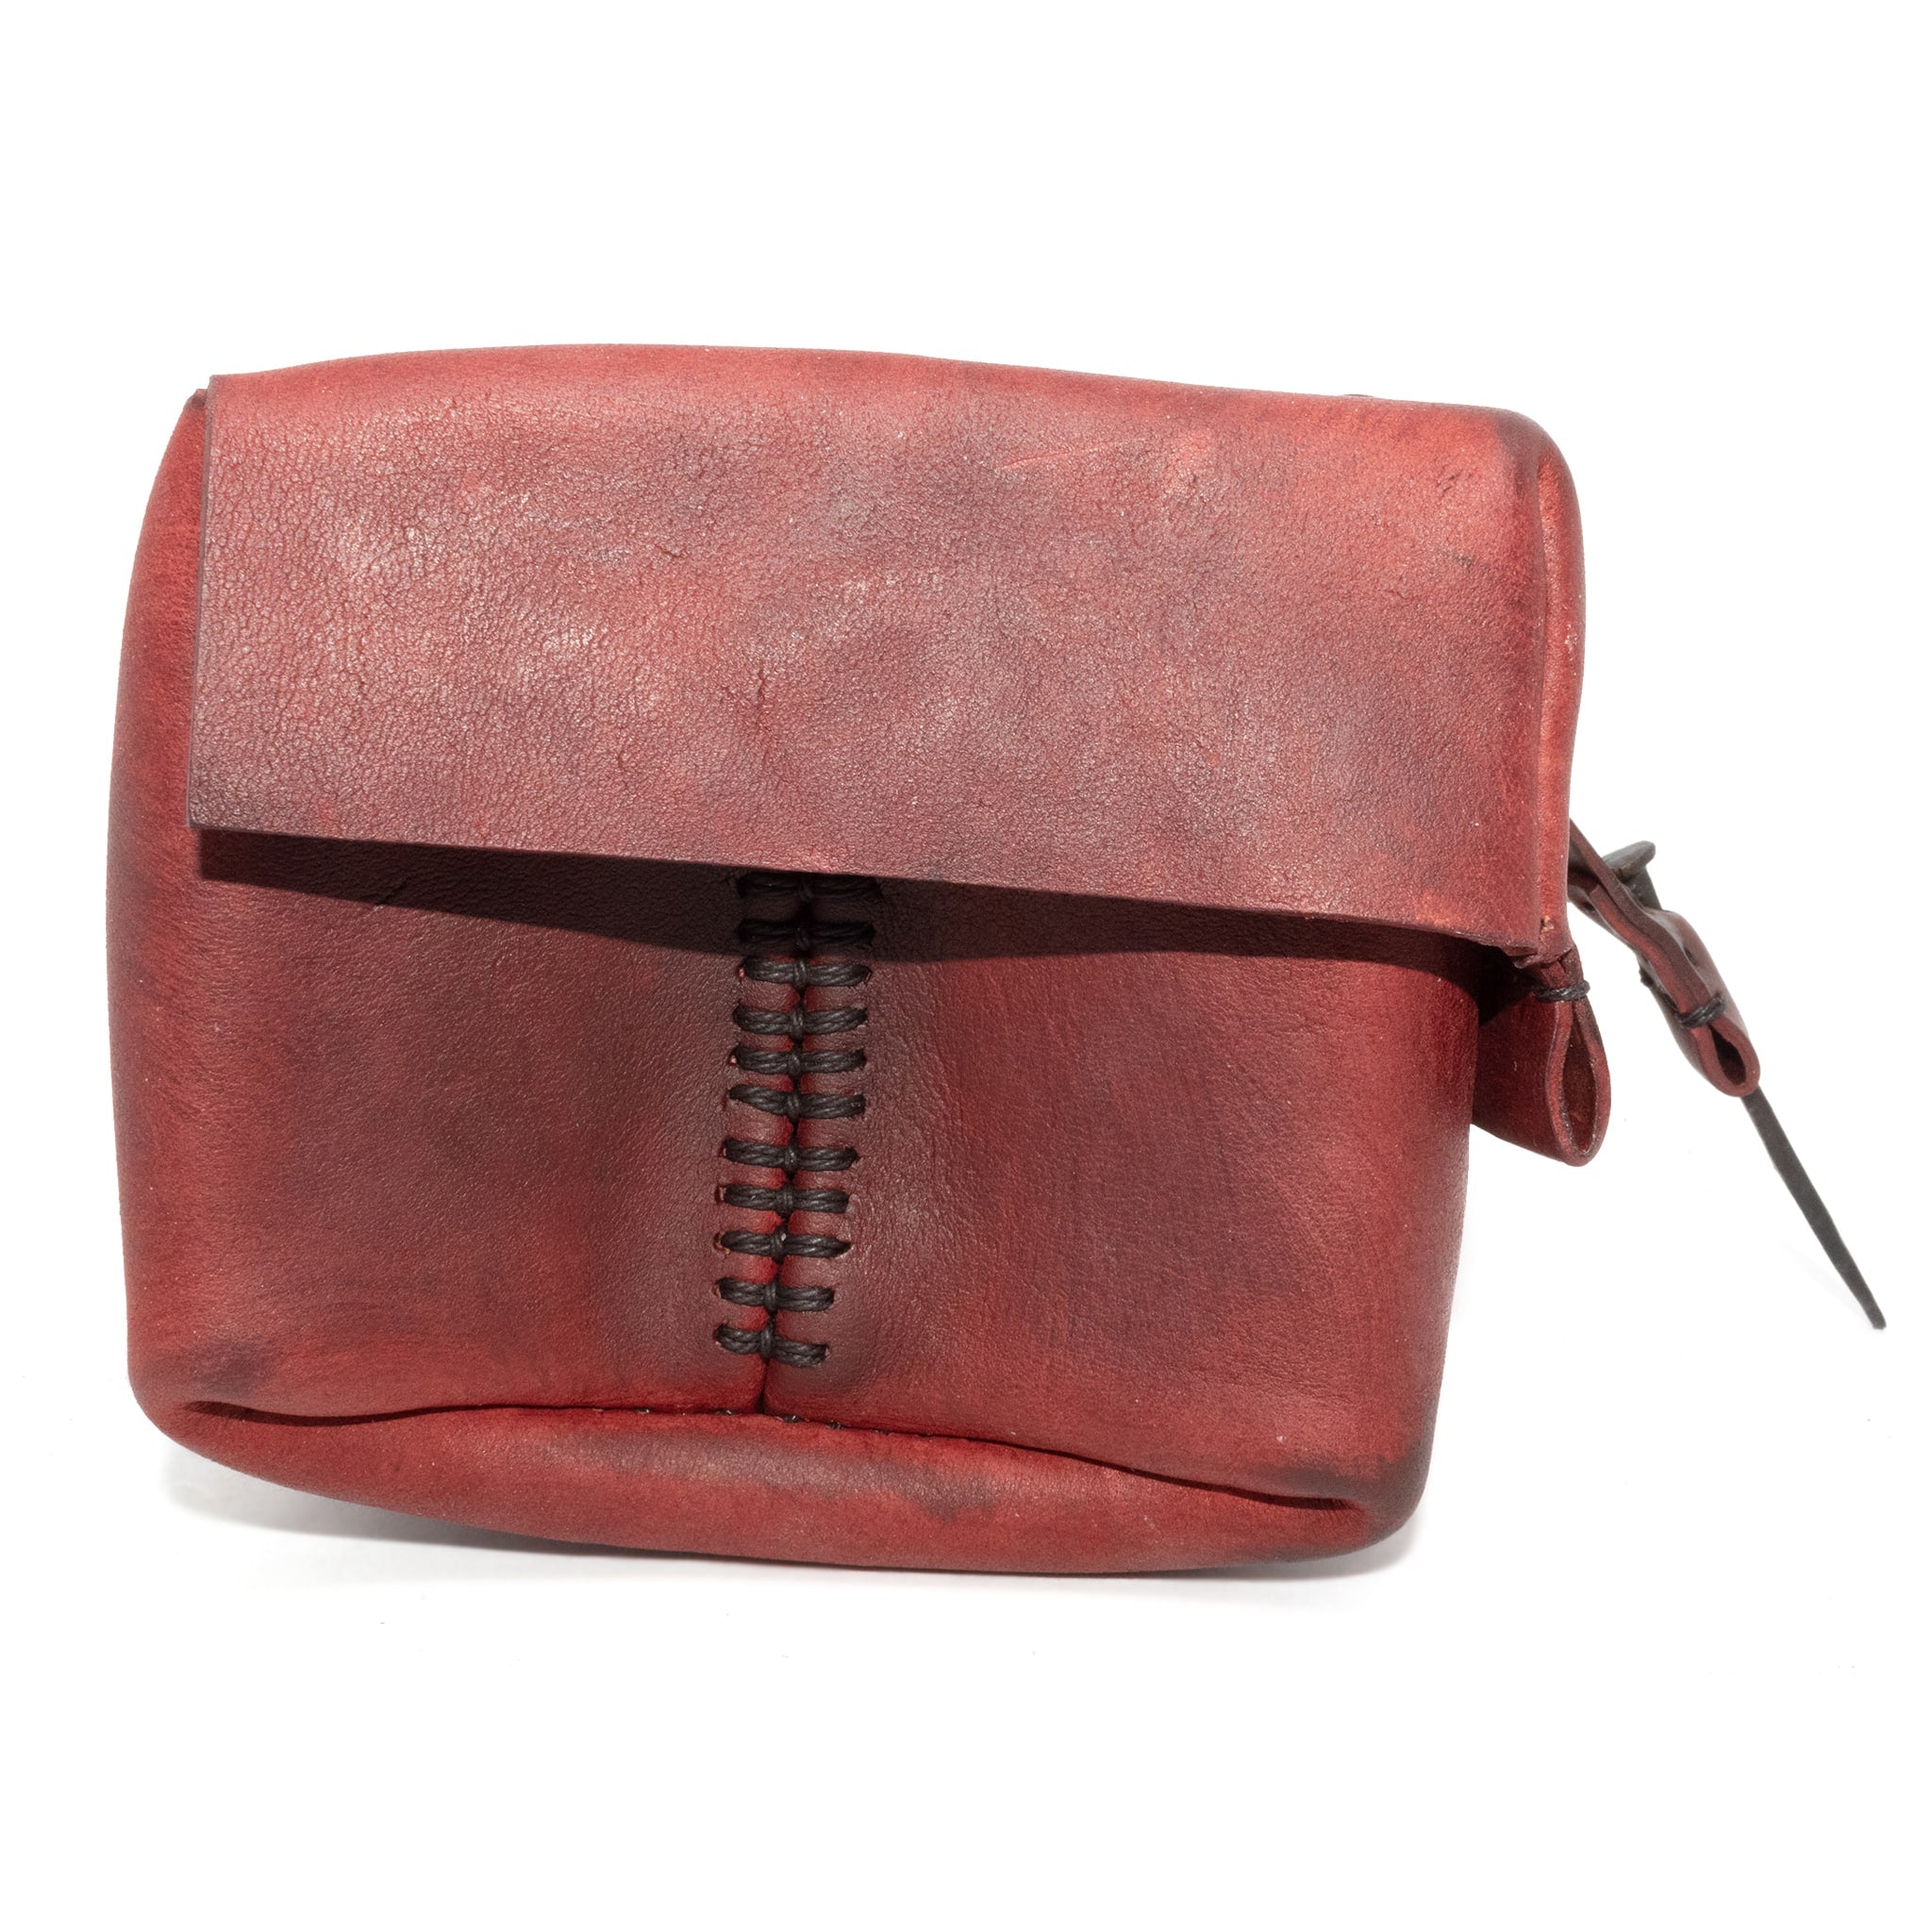 horse culatta hand dyed leather vanity case from atelier skn.